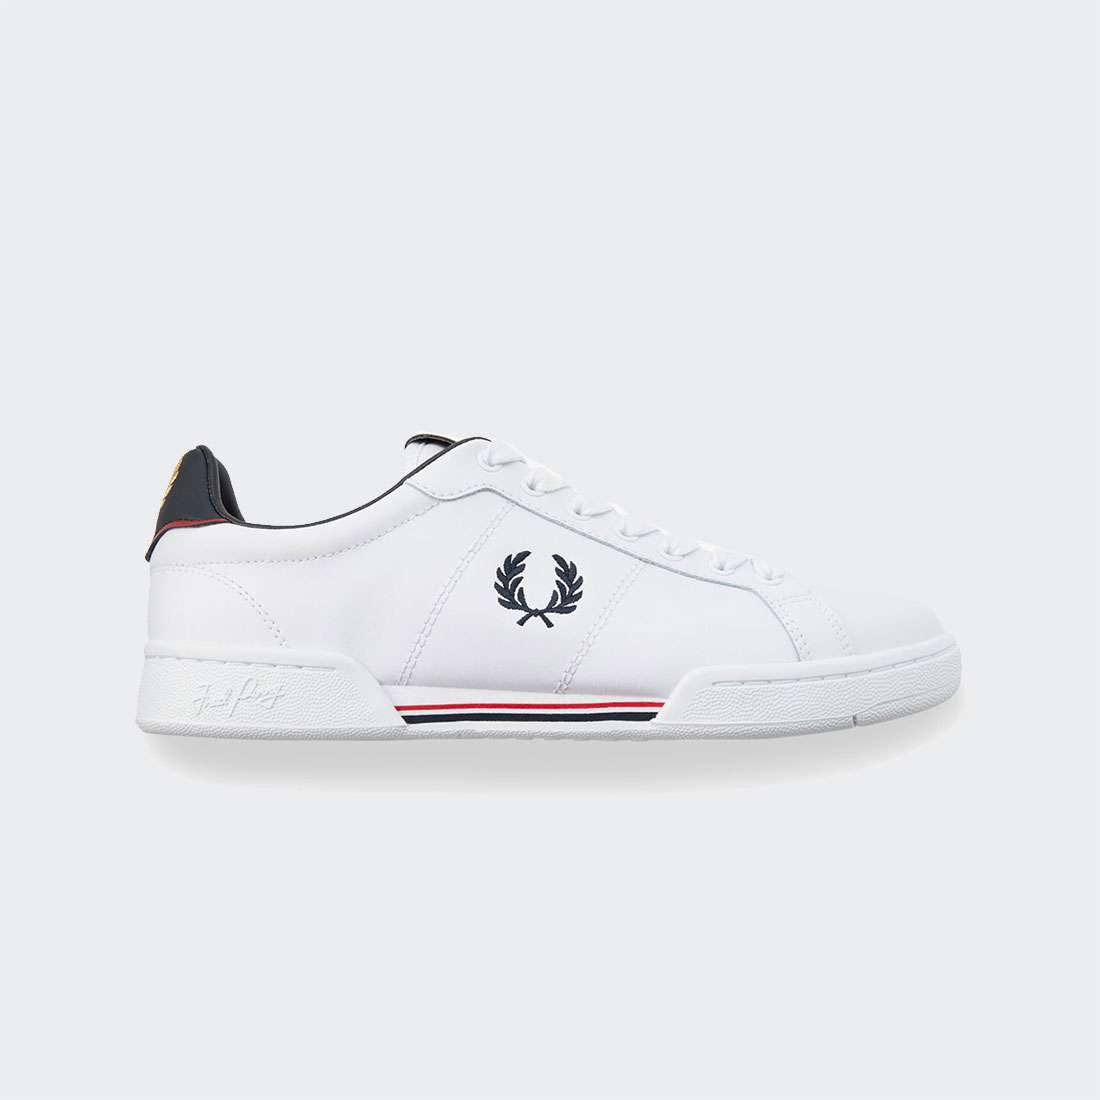 FRED PERRY B722 WHITE/NAVY/RED